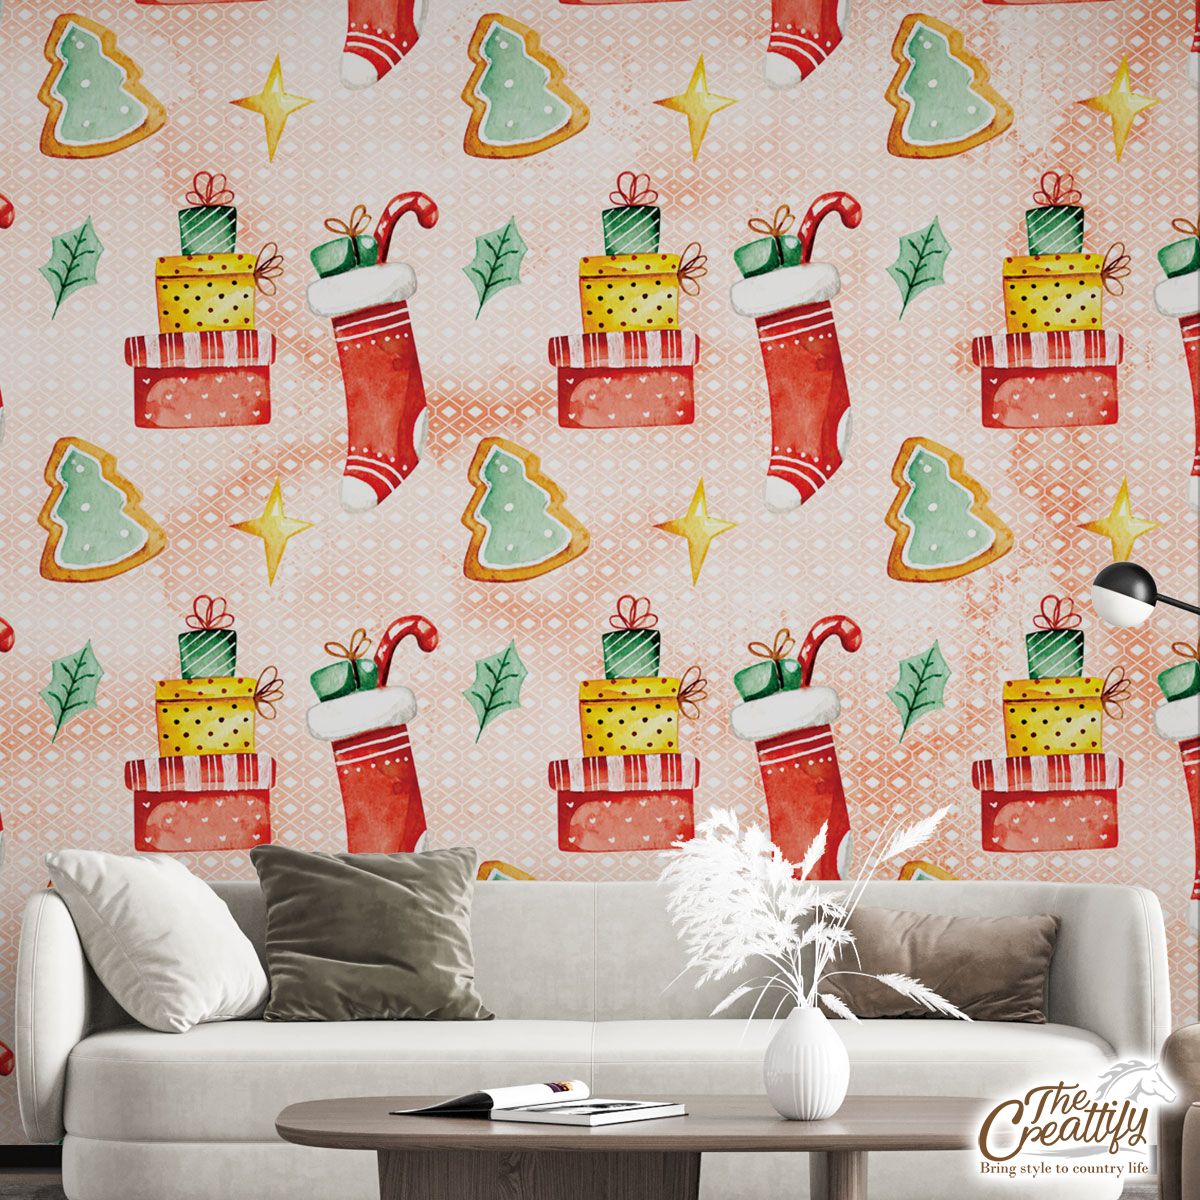 Gingerbread, Christmas Tree, Red Socks With Candy Canes Wall Mural